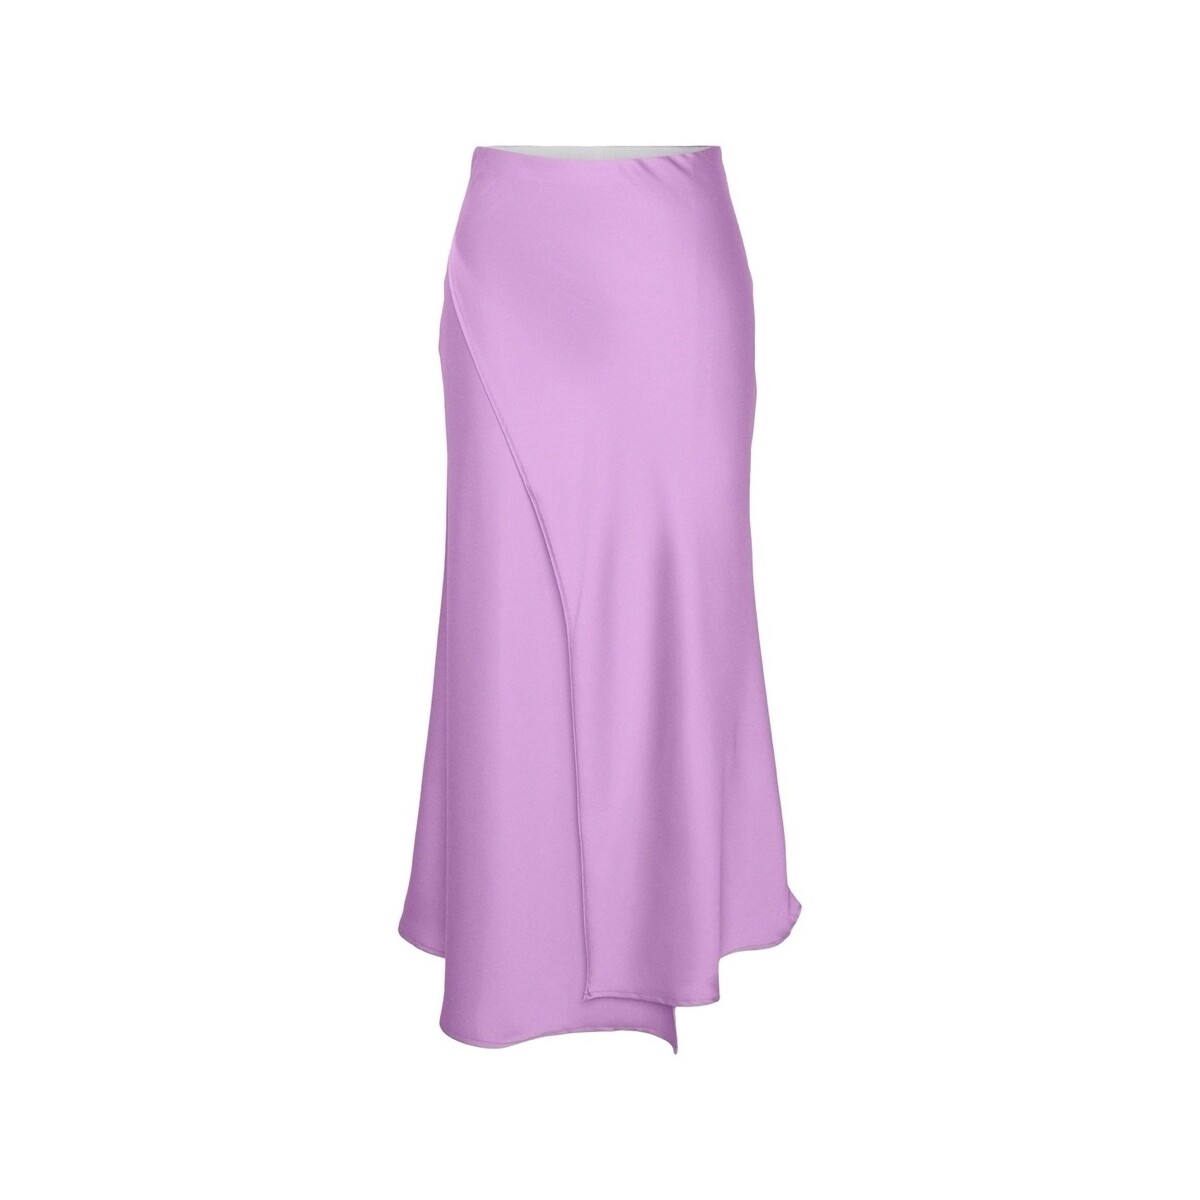 Abbigliamento Donna Gonne Y.a.s YAS Hilly Skirt - African Violet Viola